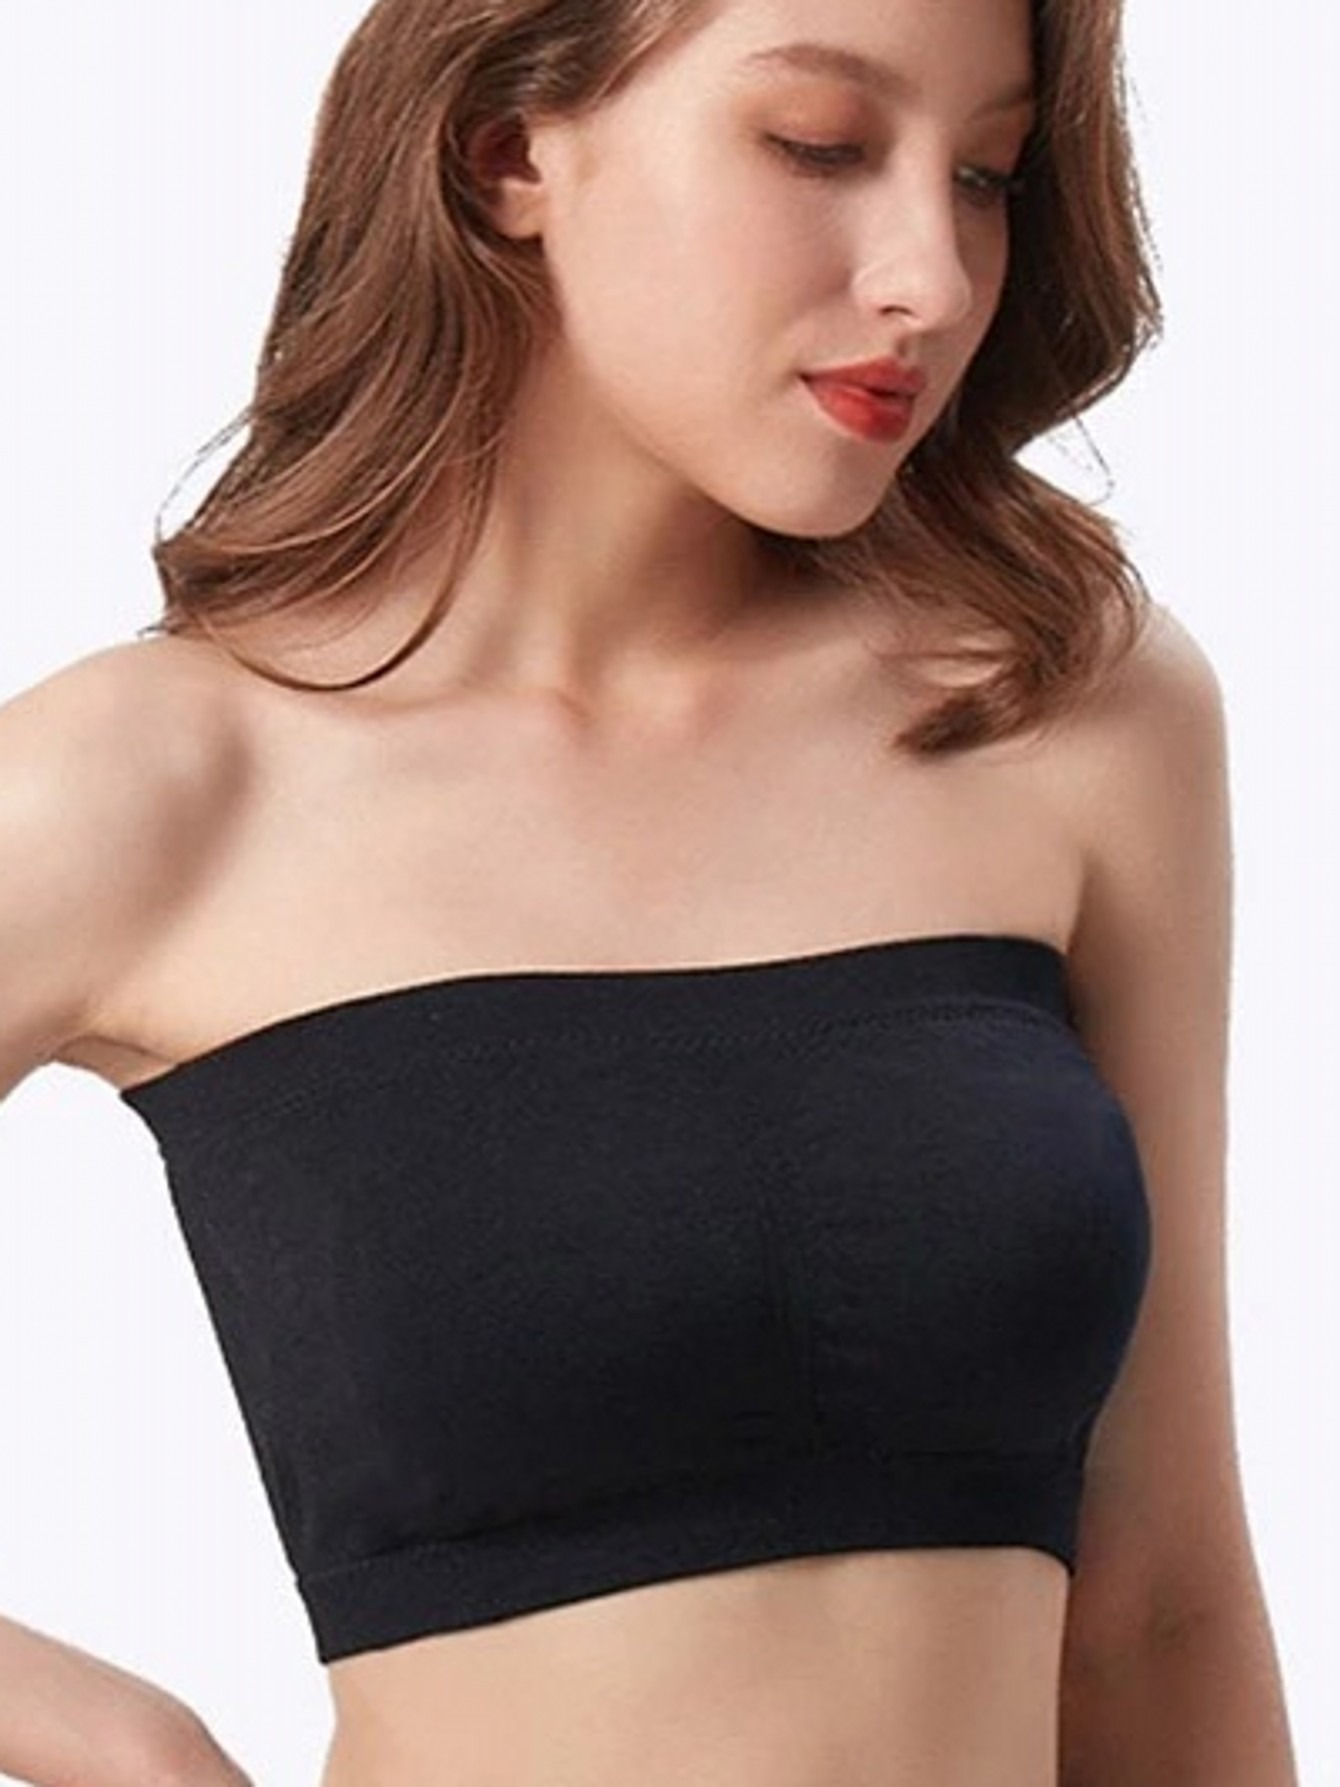 S-3XL Women Double Layered Strapless Tube Tops Bra Bandeau